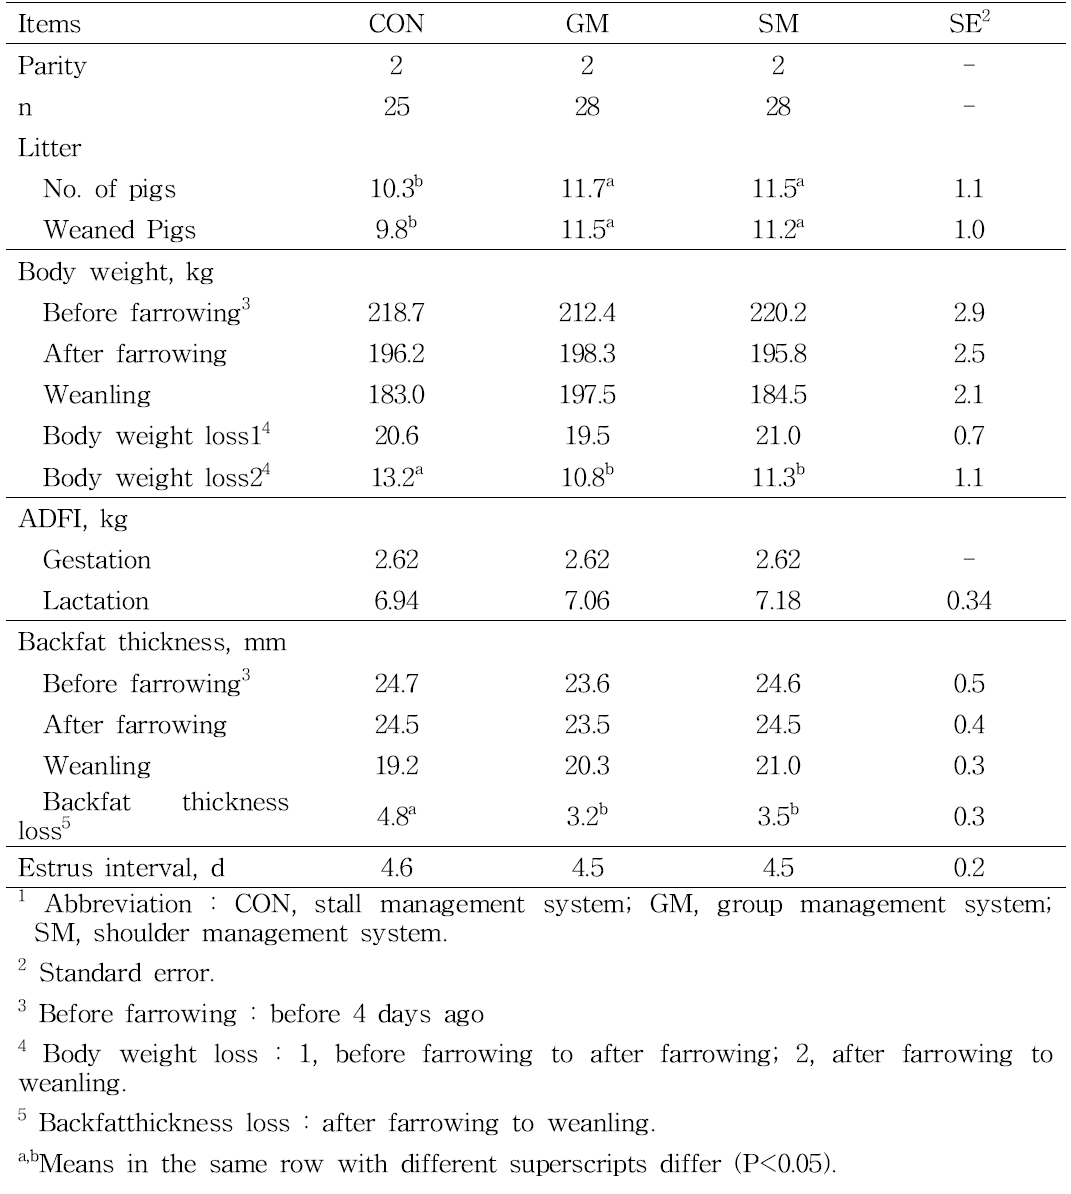 Effect of management system on growth performance in lactating sows